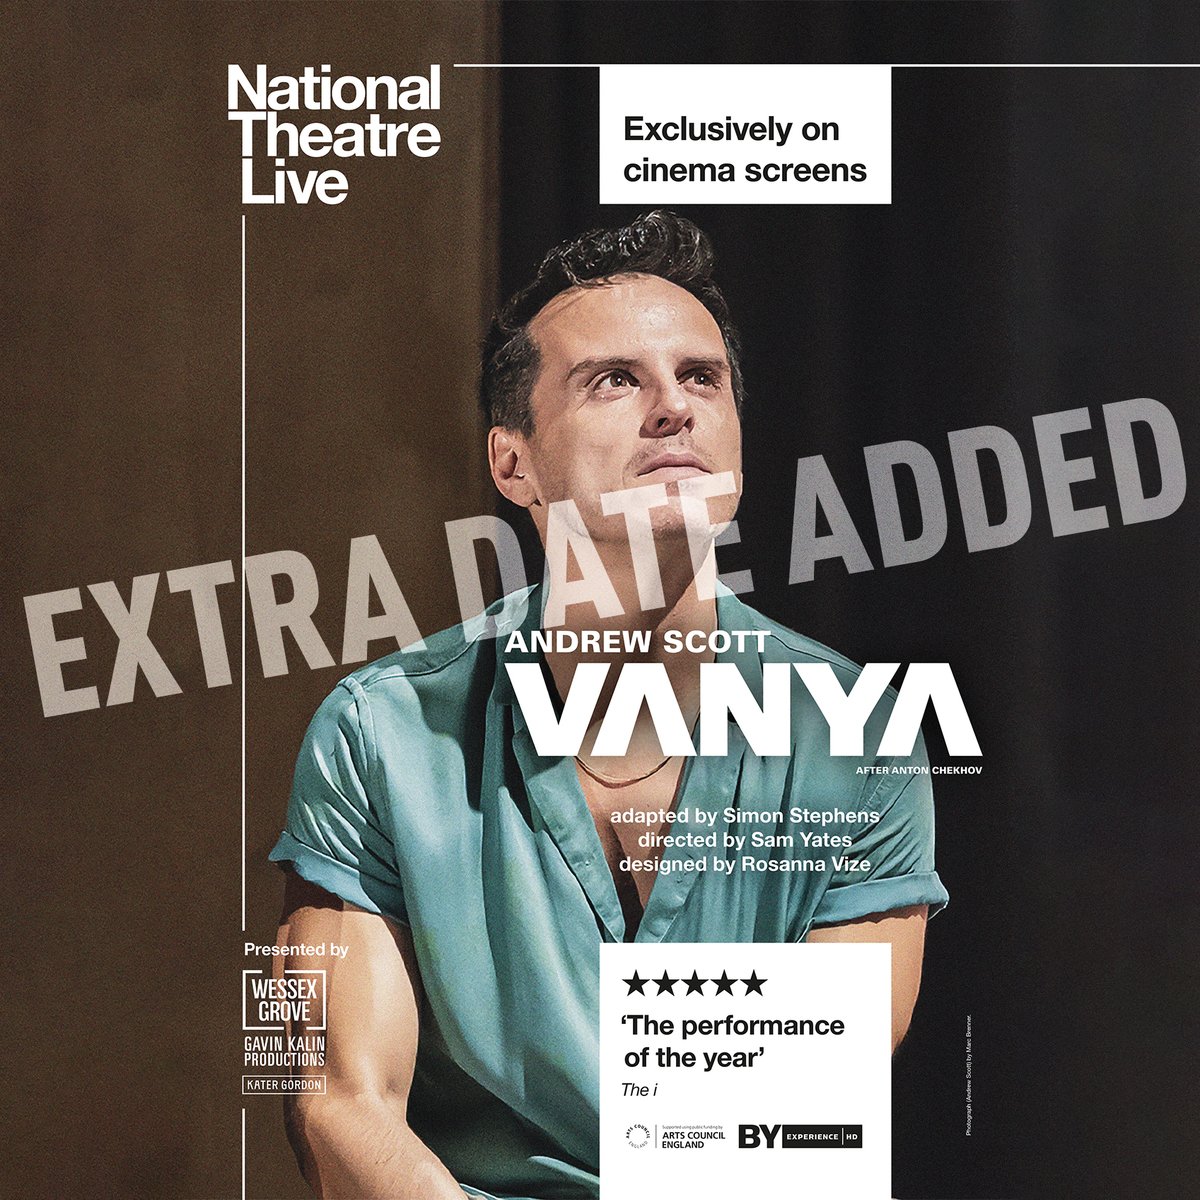 EXTRA DATE ADDED: Vanya - National Theatre Live, Encore Due to demand an extra screening of Vanya has been added for June. Andrew Scott brings multiple characters to life in this radical new version of Chekhov’s Uncle Vanya. Sun 23 Jun, 8pm | Book now: tinyurl.com/NTLVanyaJun24